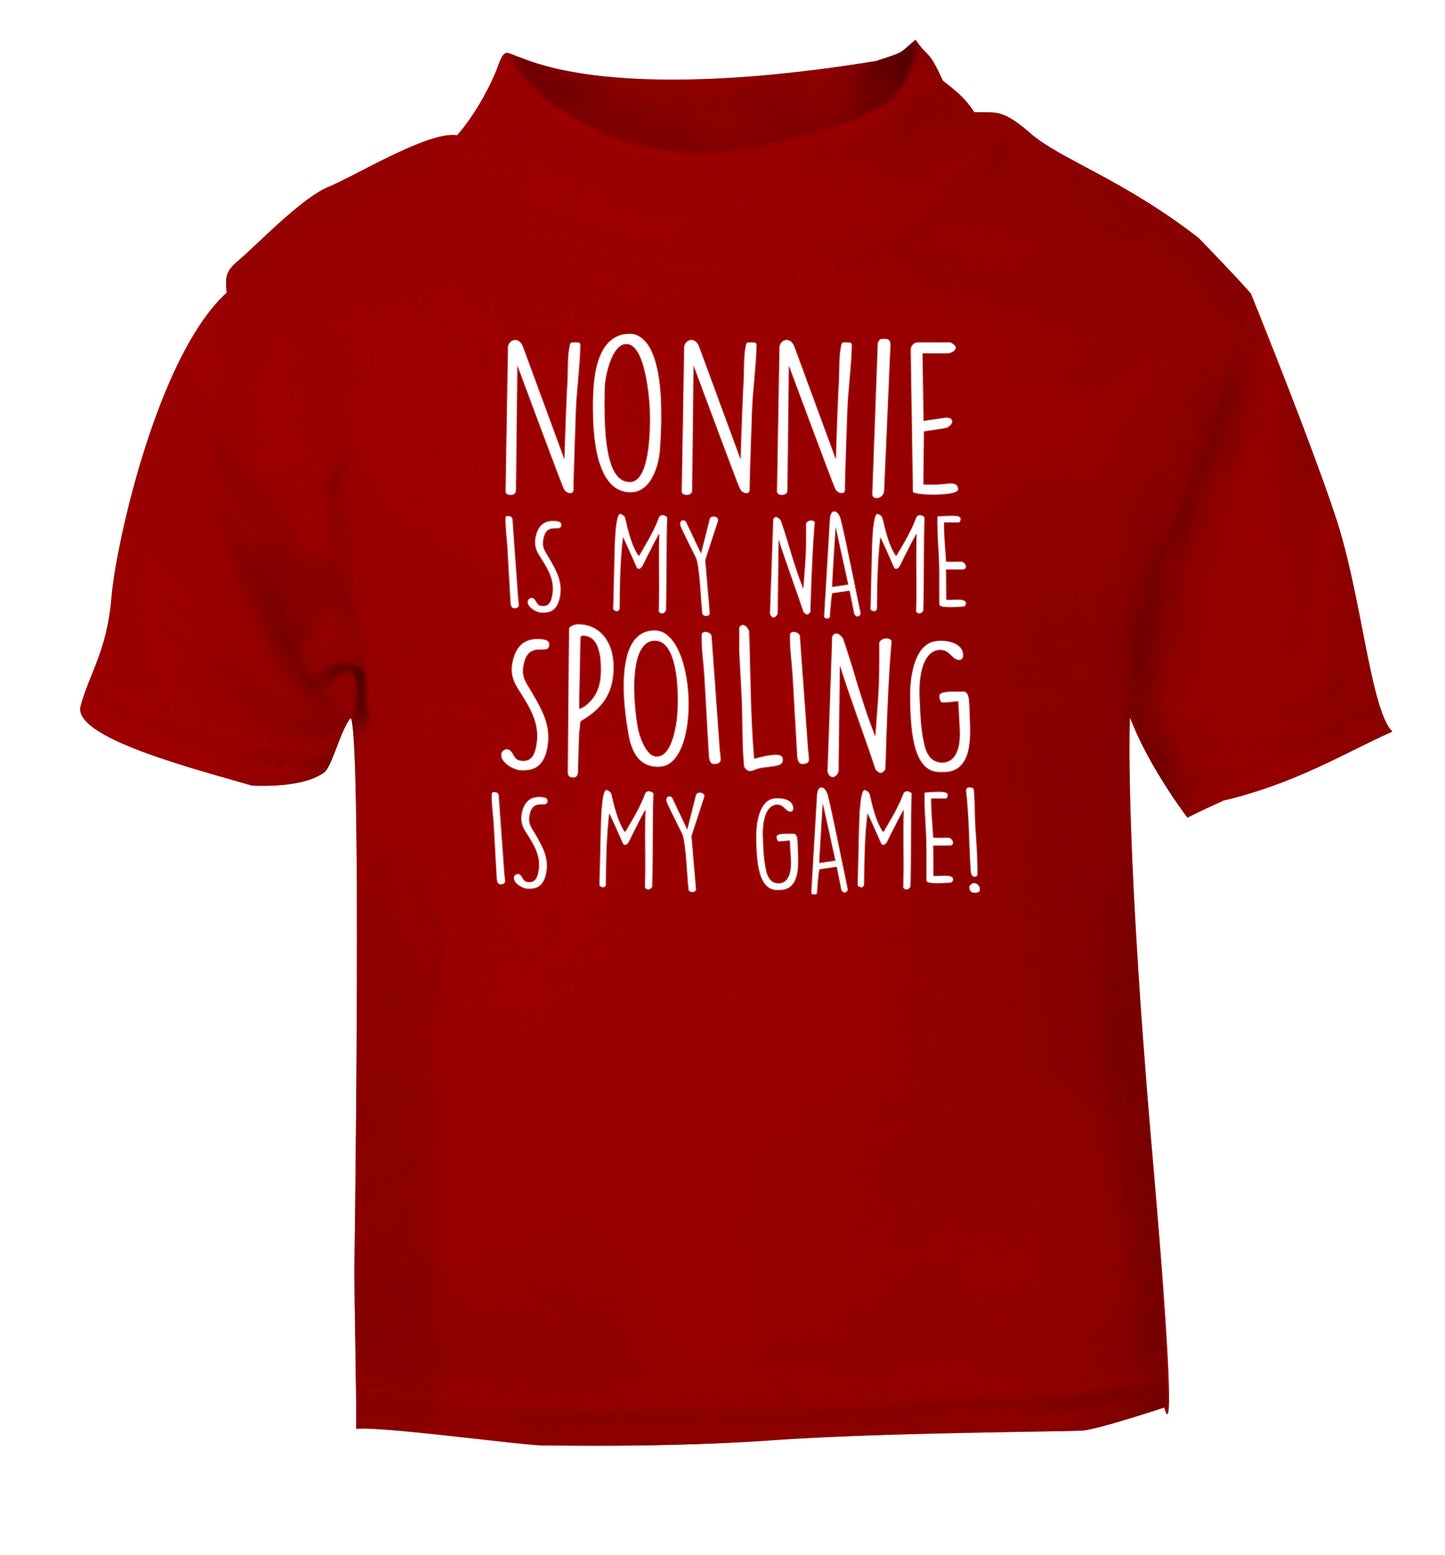 Nonnie is my name, spoiling is my game red Baby Toddler Tshirt 2 Years